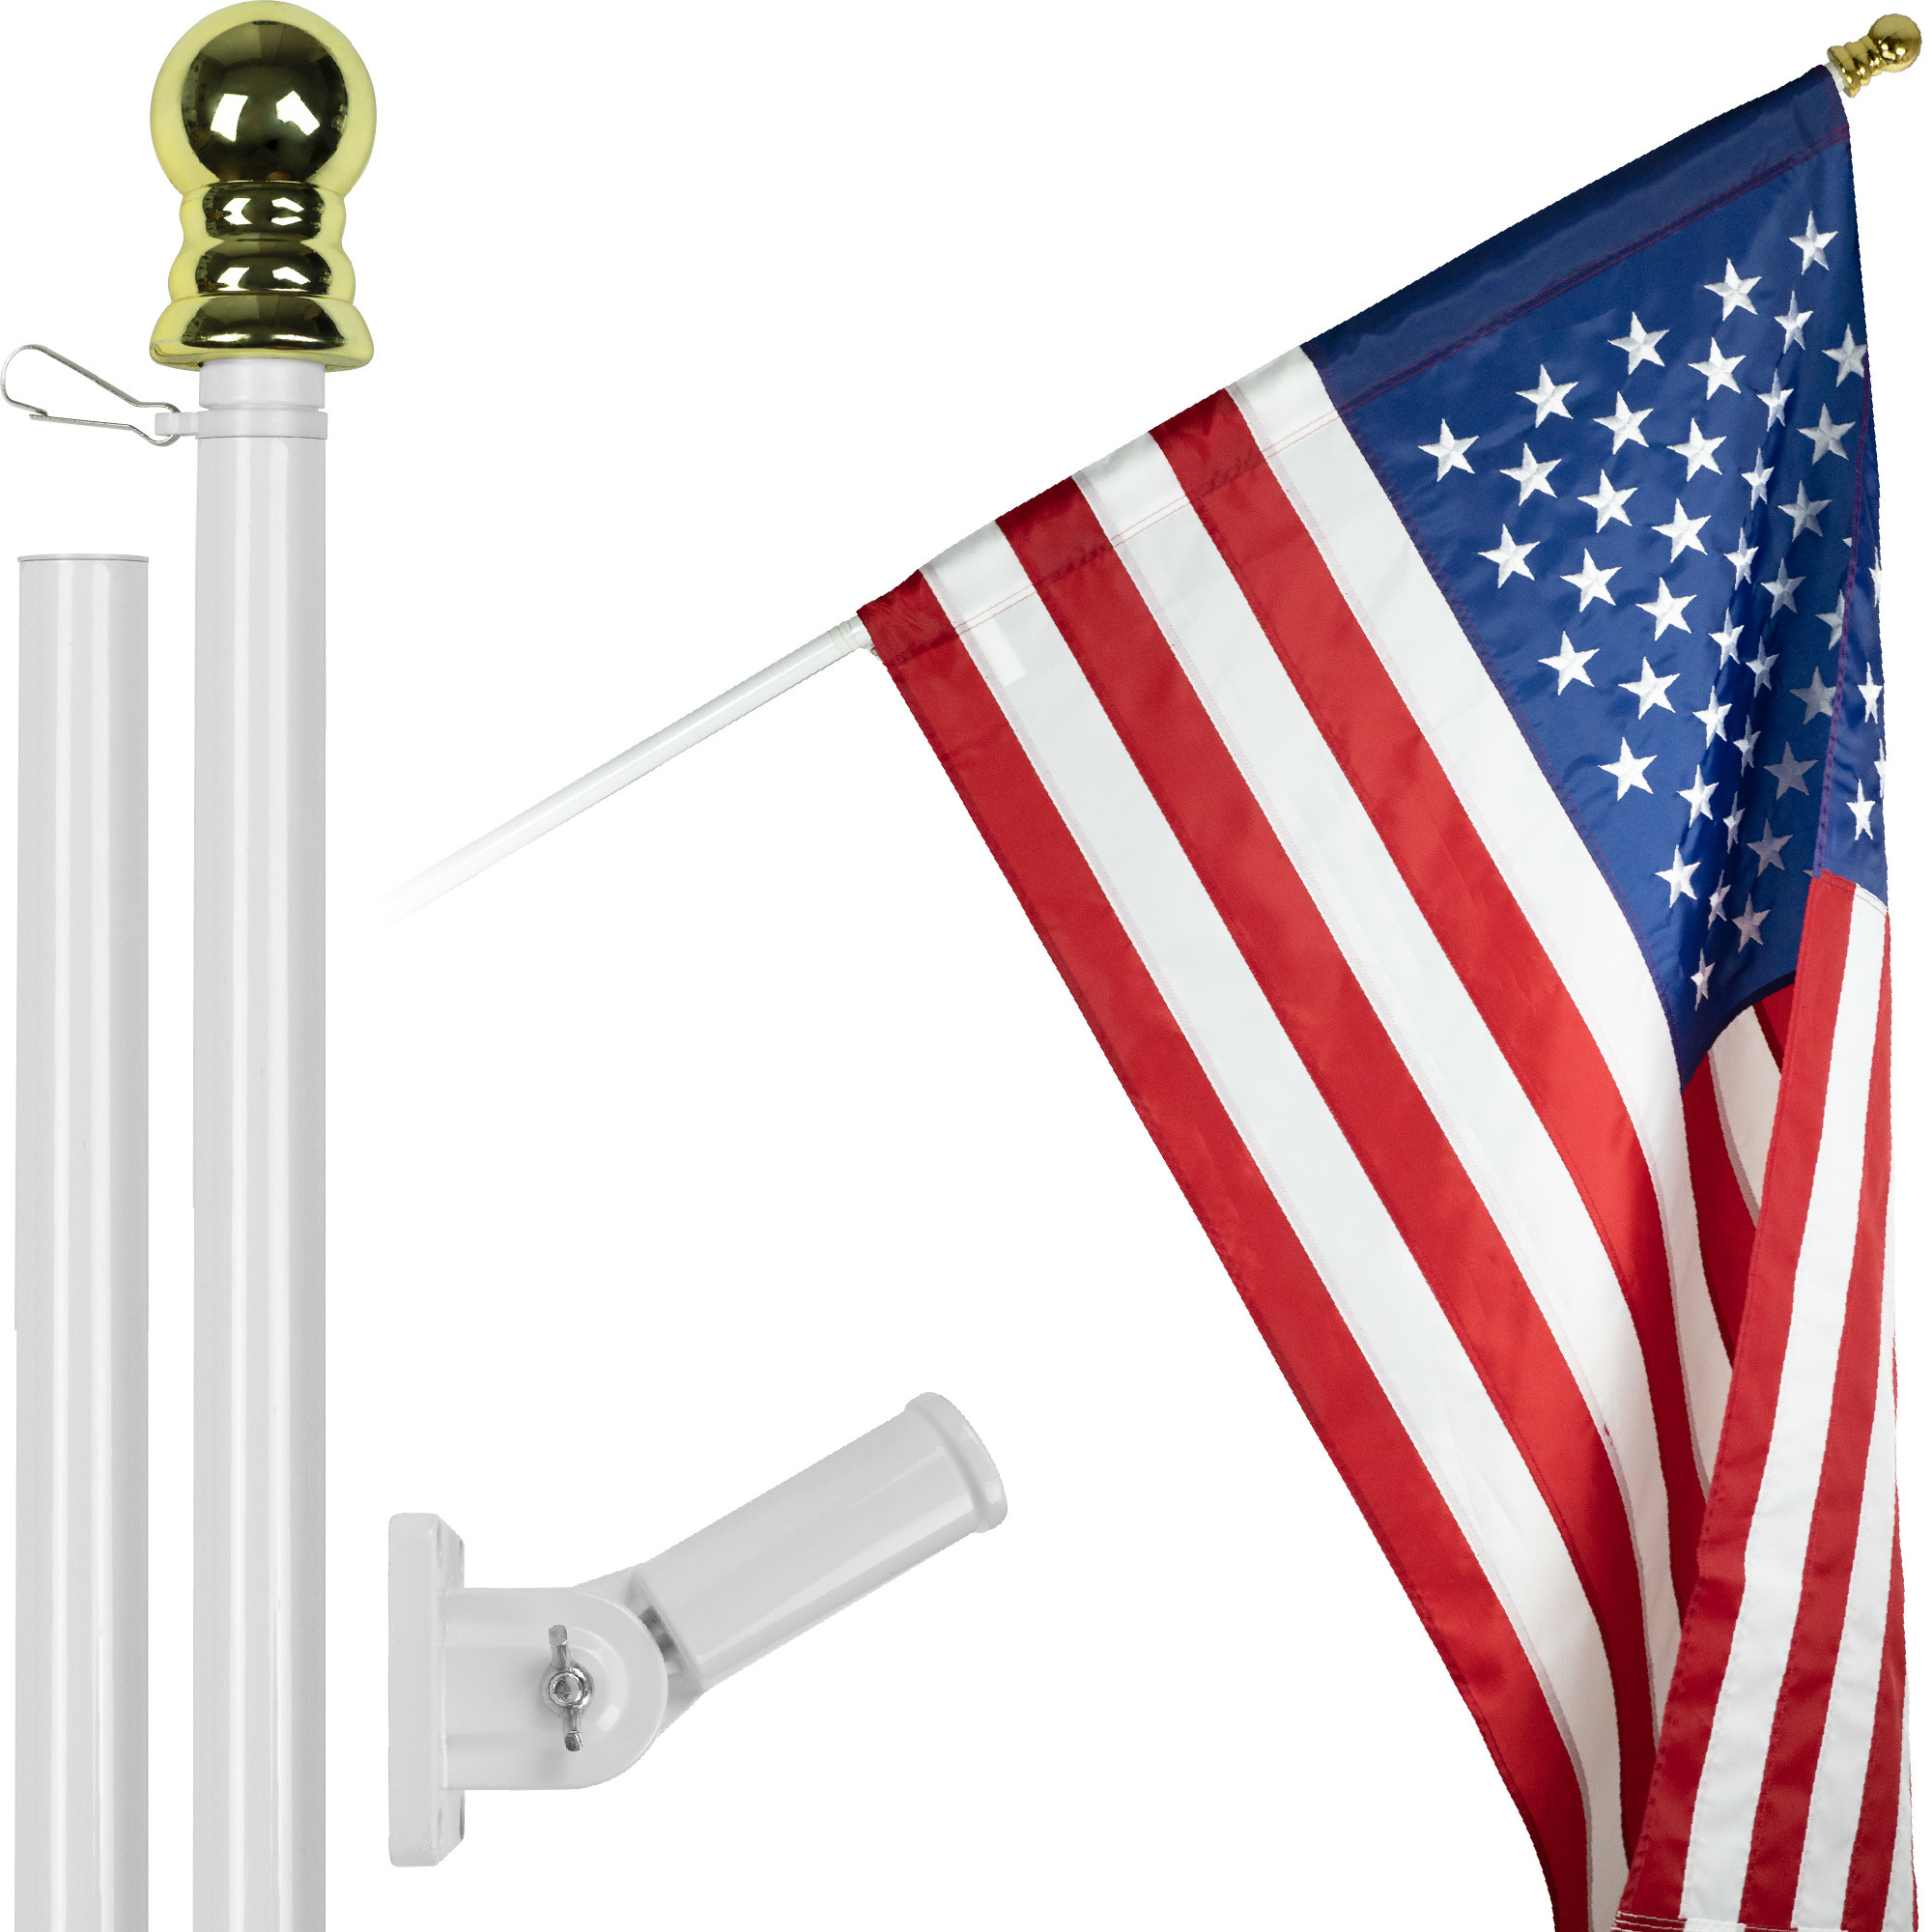 G128 - 5 Feet Tangle Free Spinning Flagpole (White) American Flag Pole Sleeve Embroidered 2x3 ft American Flag Pole Sleeve (Flag Included) Aluminum Flag Pole - image 1 of 9